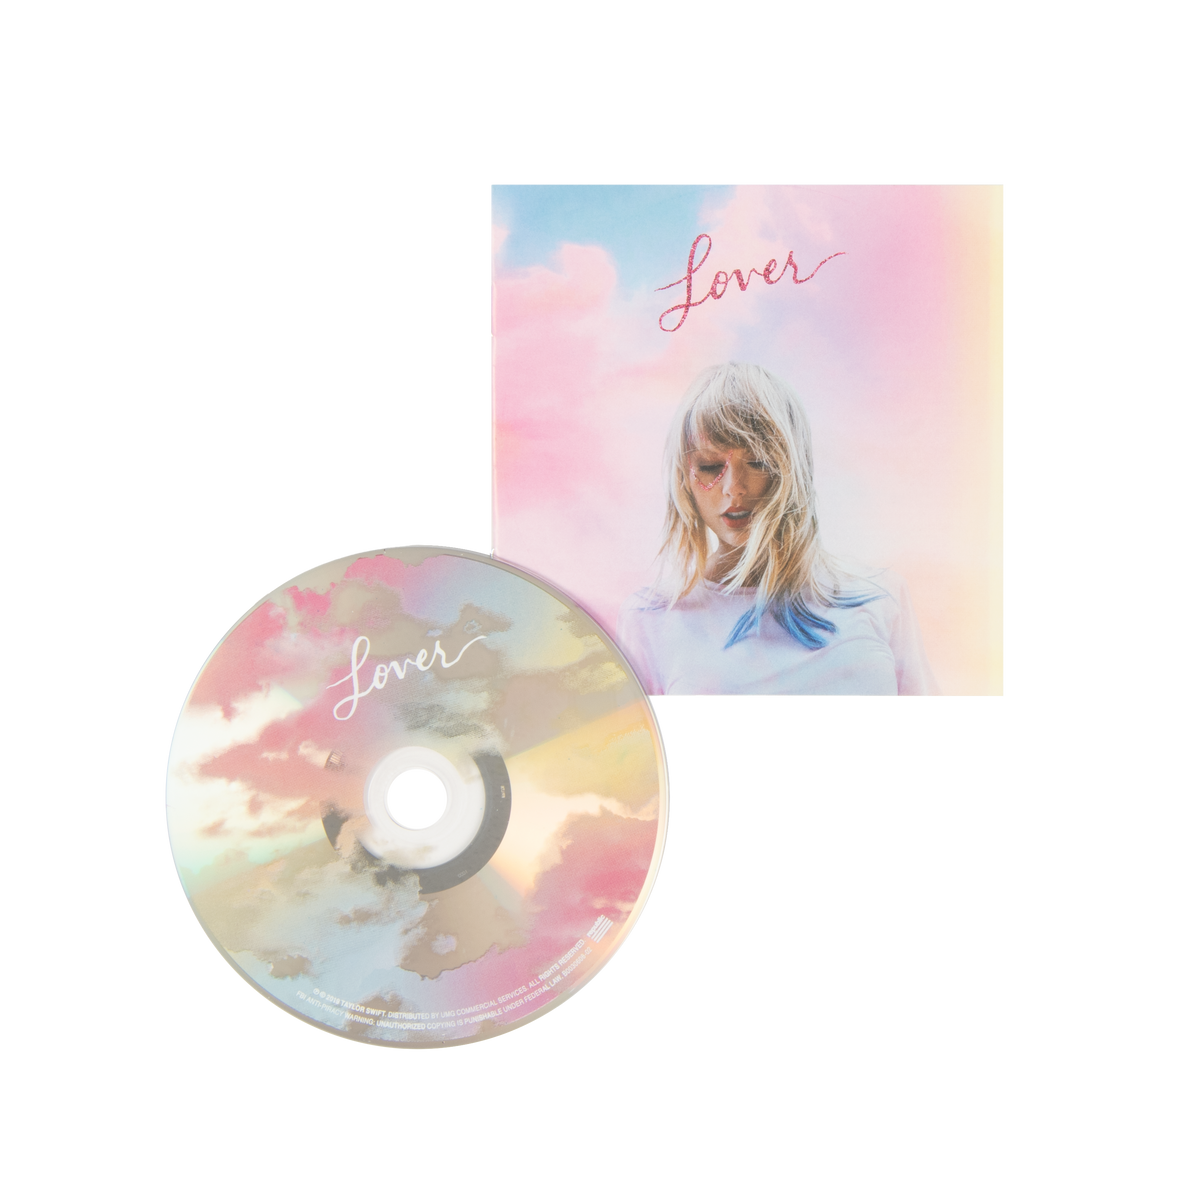 Lover (Deluxe Album Version 3): Swift, Taylor, Swift, Taylor